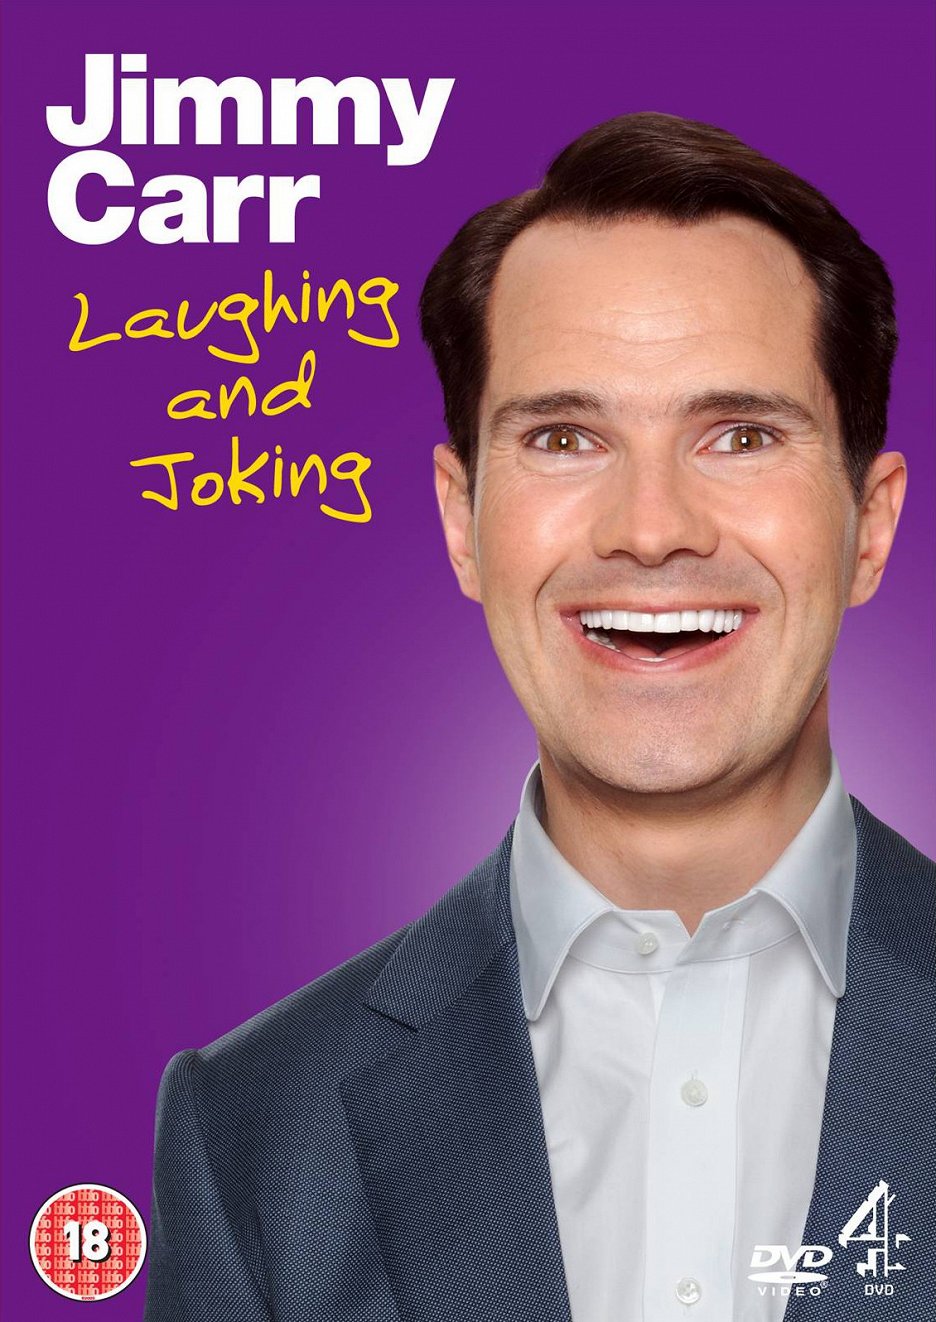 Jimmy Carr Laughing And Joking 2013 Čsfdcz 